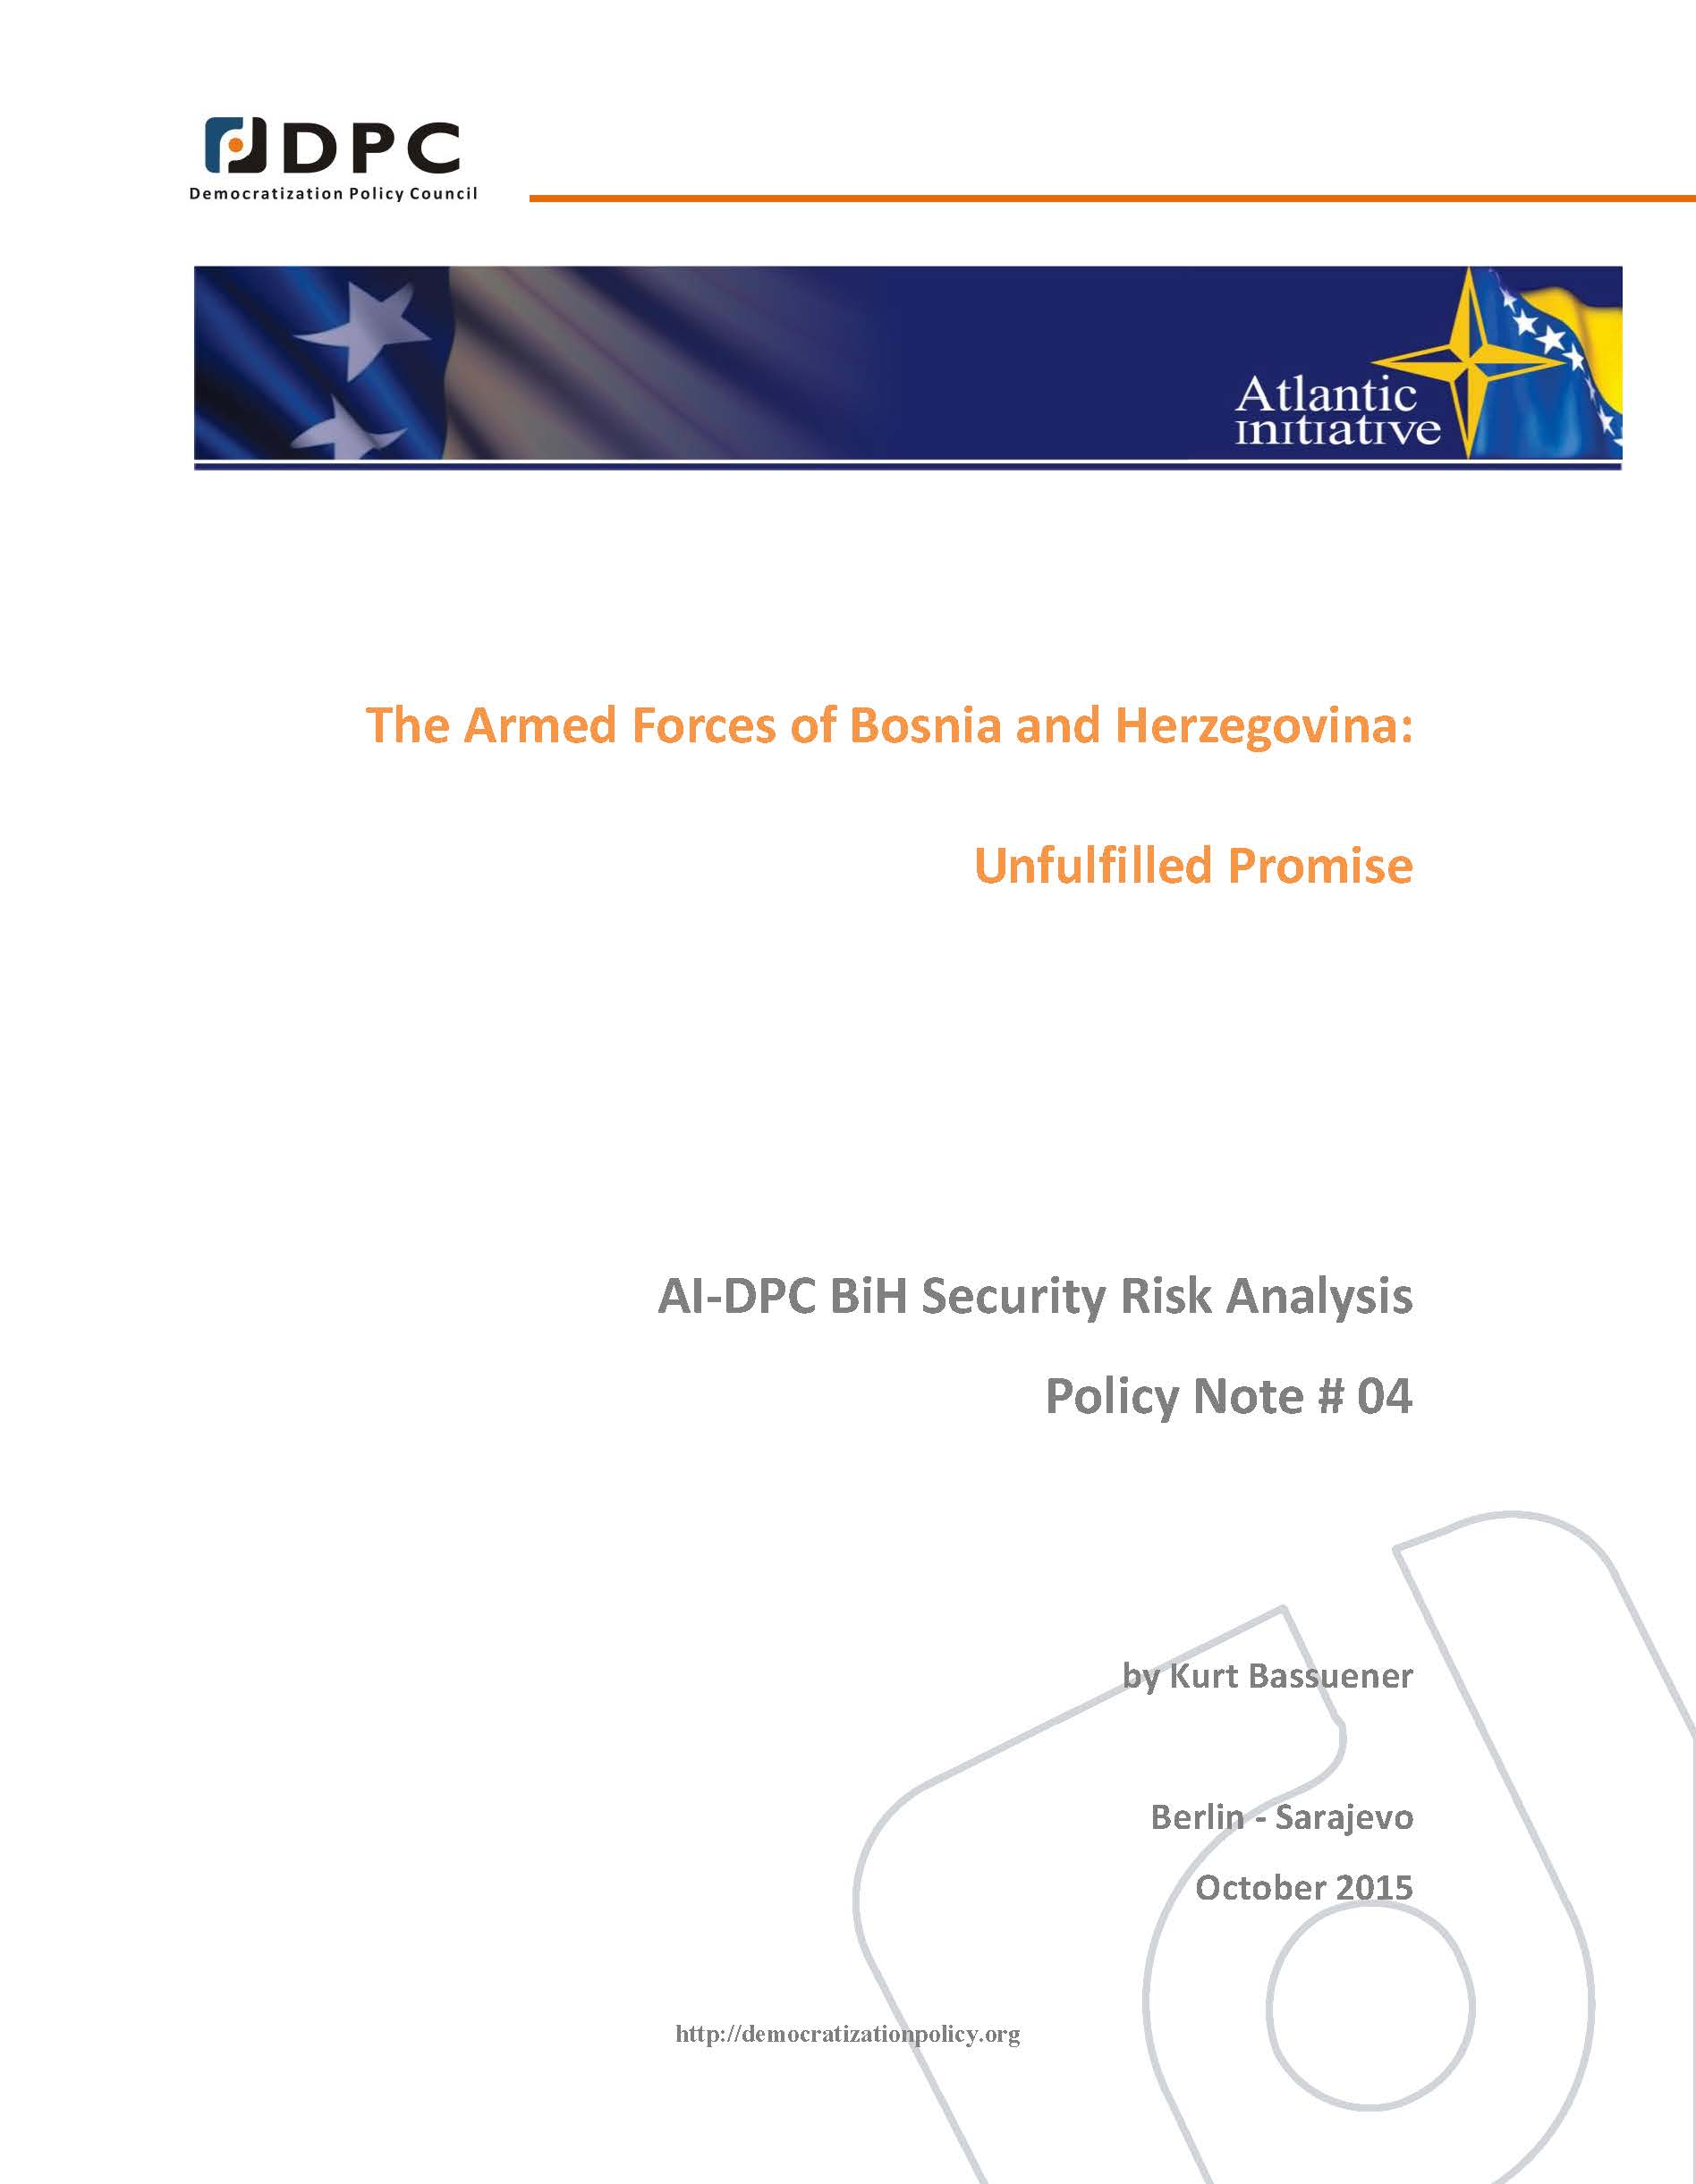 AI-DPC BiH SECURITY ANALYSIS POLICY NOTE 04: The Armed Forces of Bosnia and Herzegovina: Unfulfilled Promise Cover Image